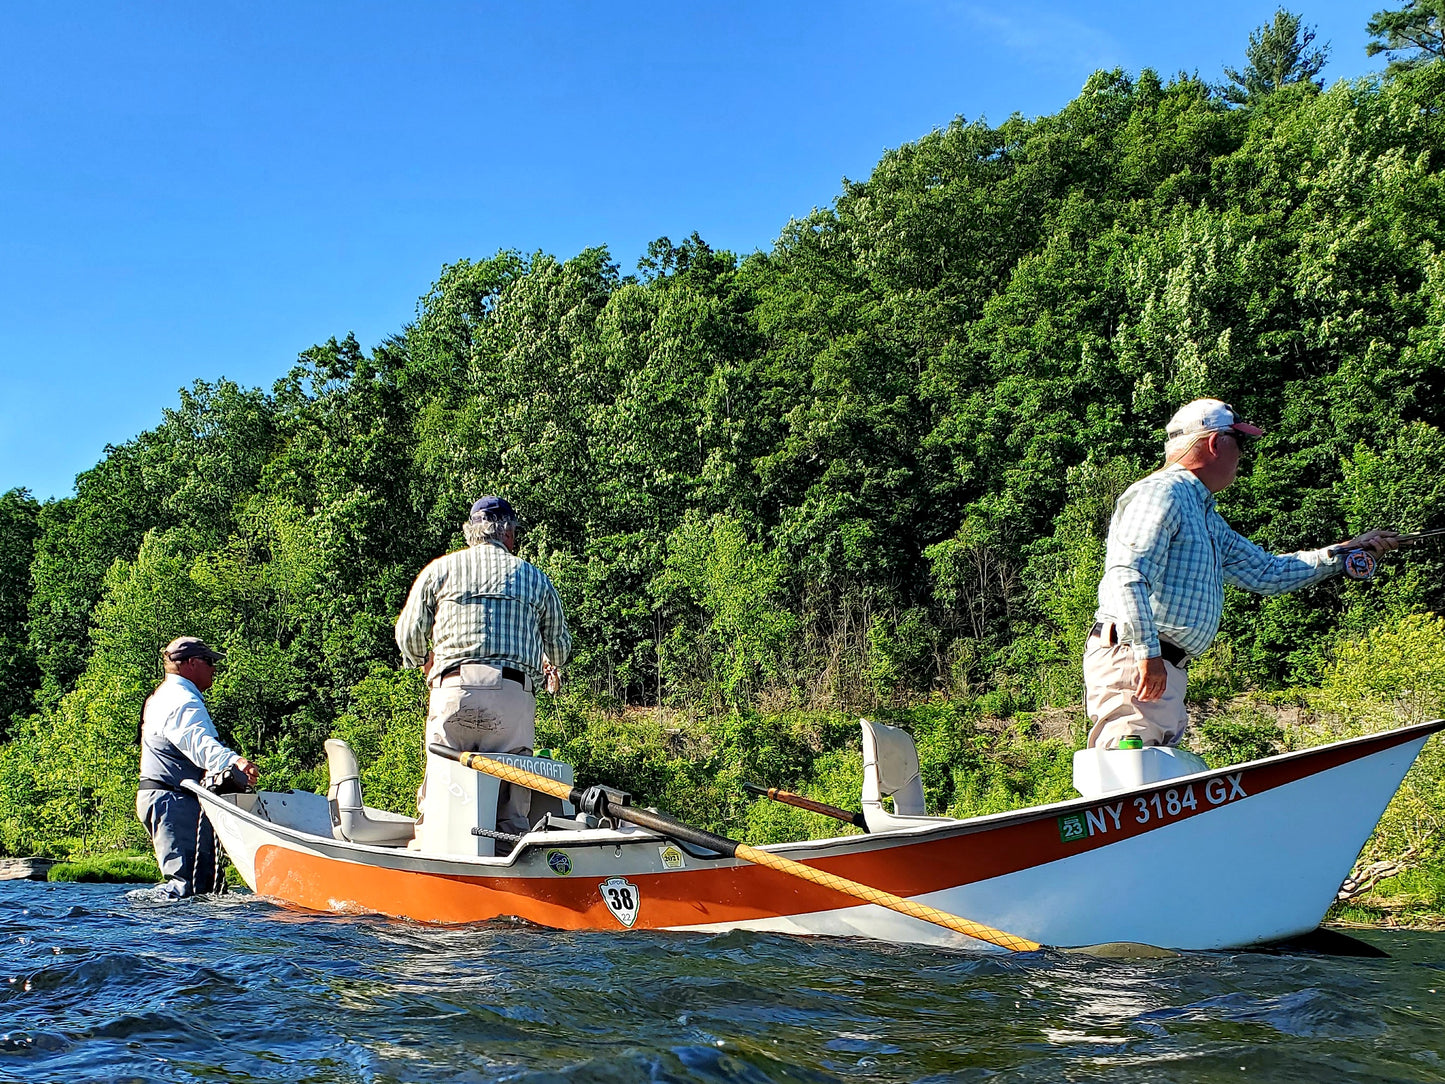 Guided Fly Fishing Trip - Gift Certificate - Upper Delaware River